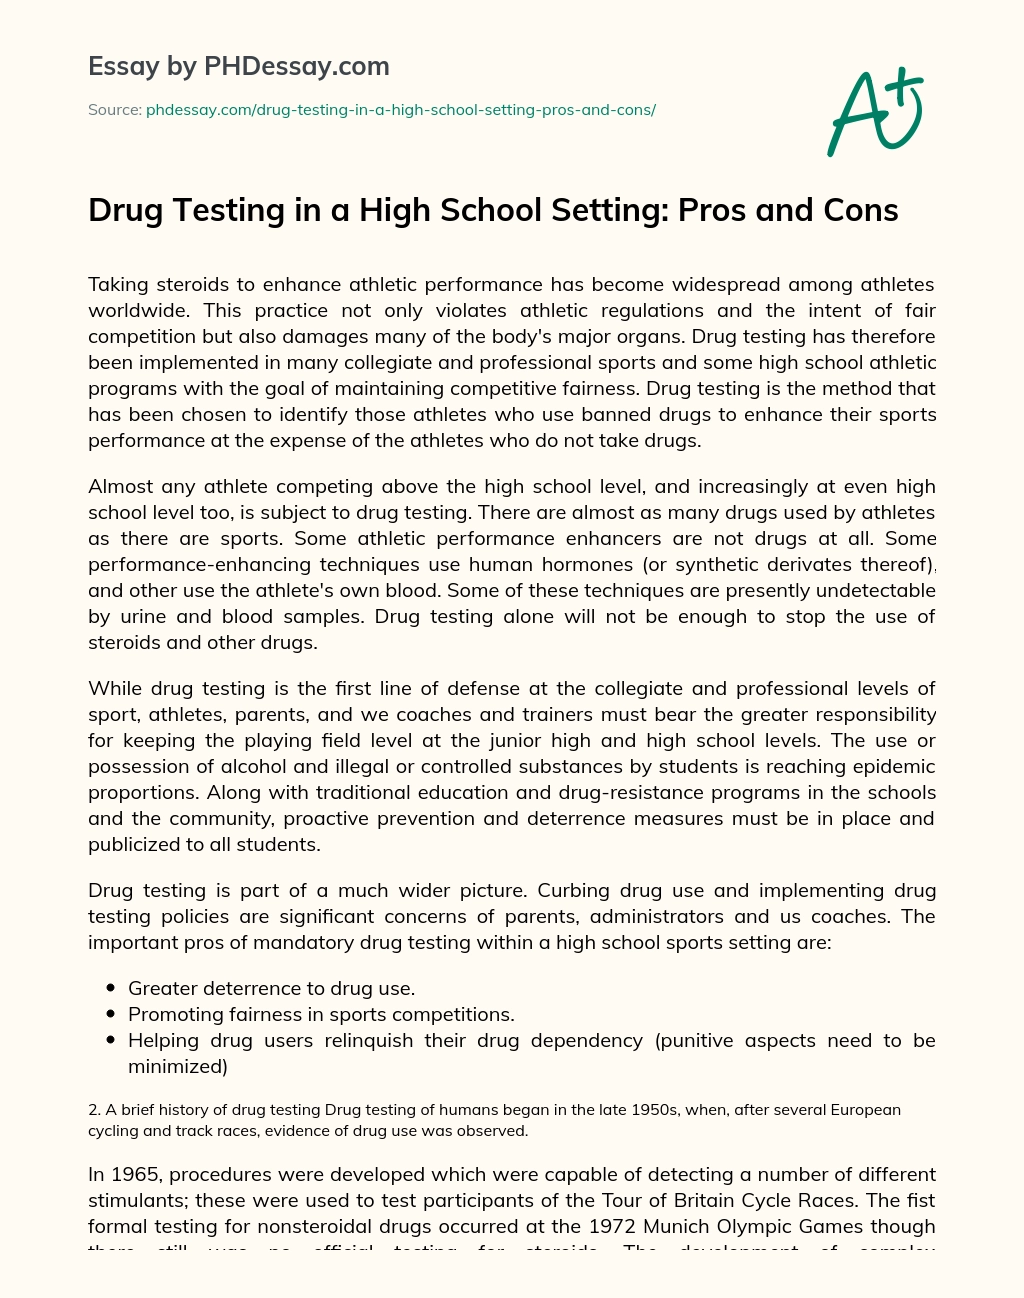 Drug Testing in a High School Setting: Pros and Cons essay